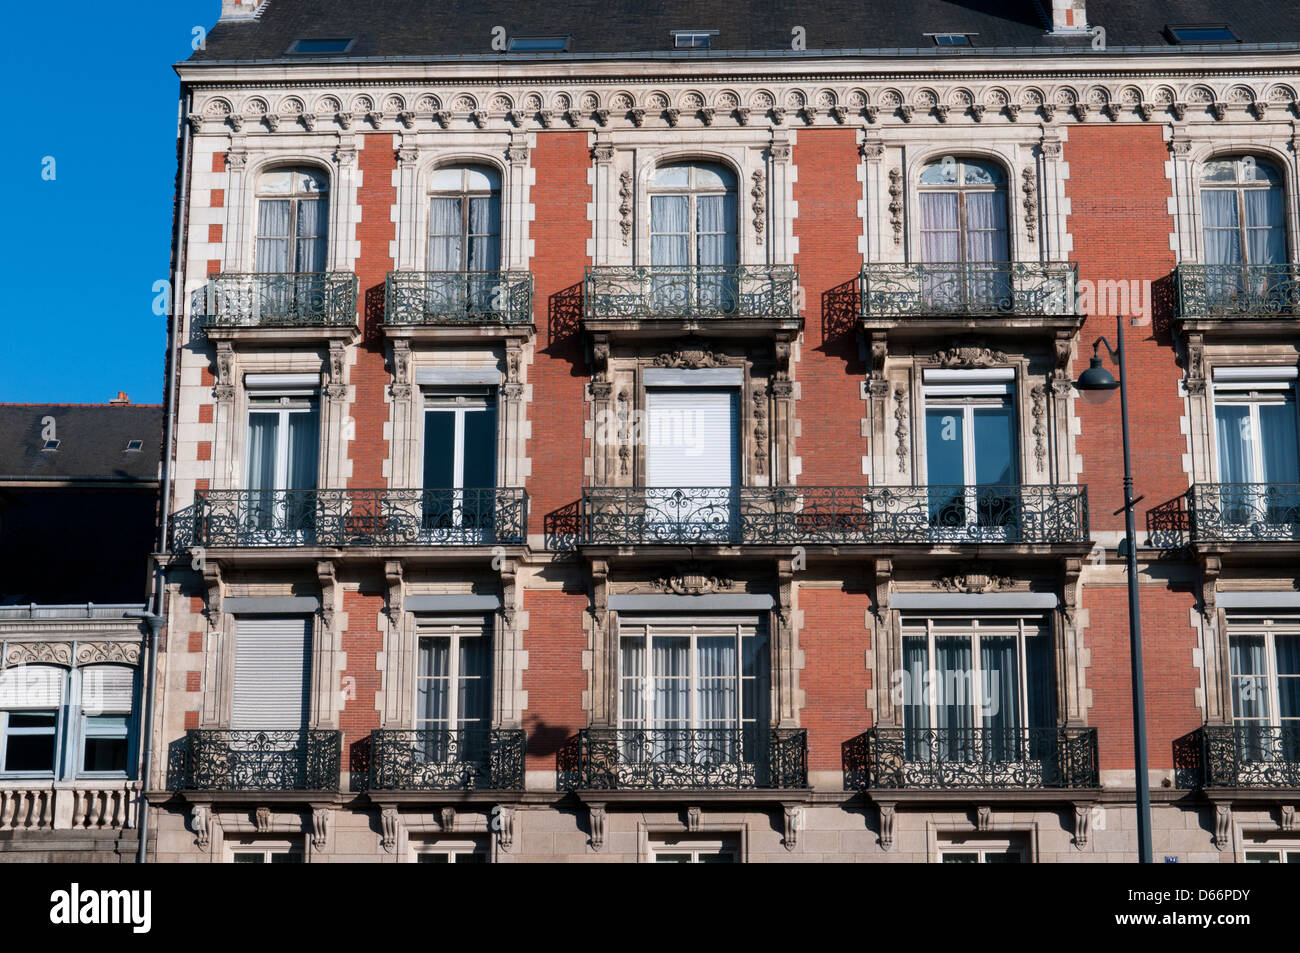 Typical architecture city of Rennes France Stock Photo